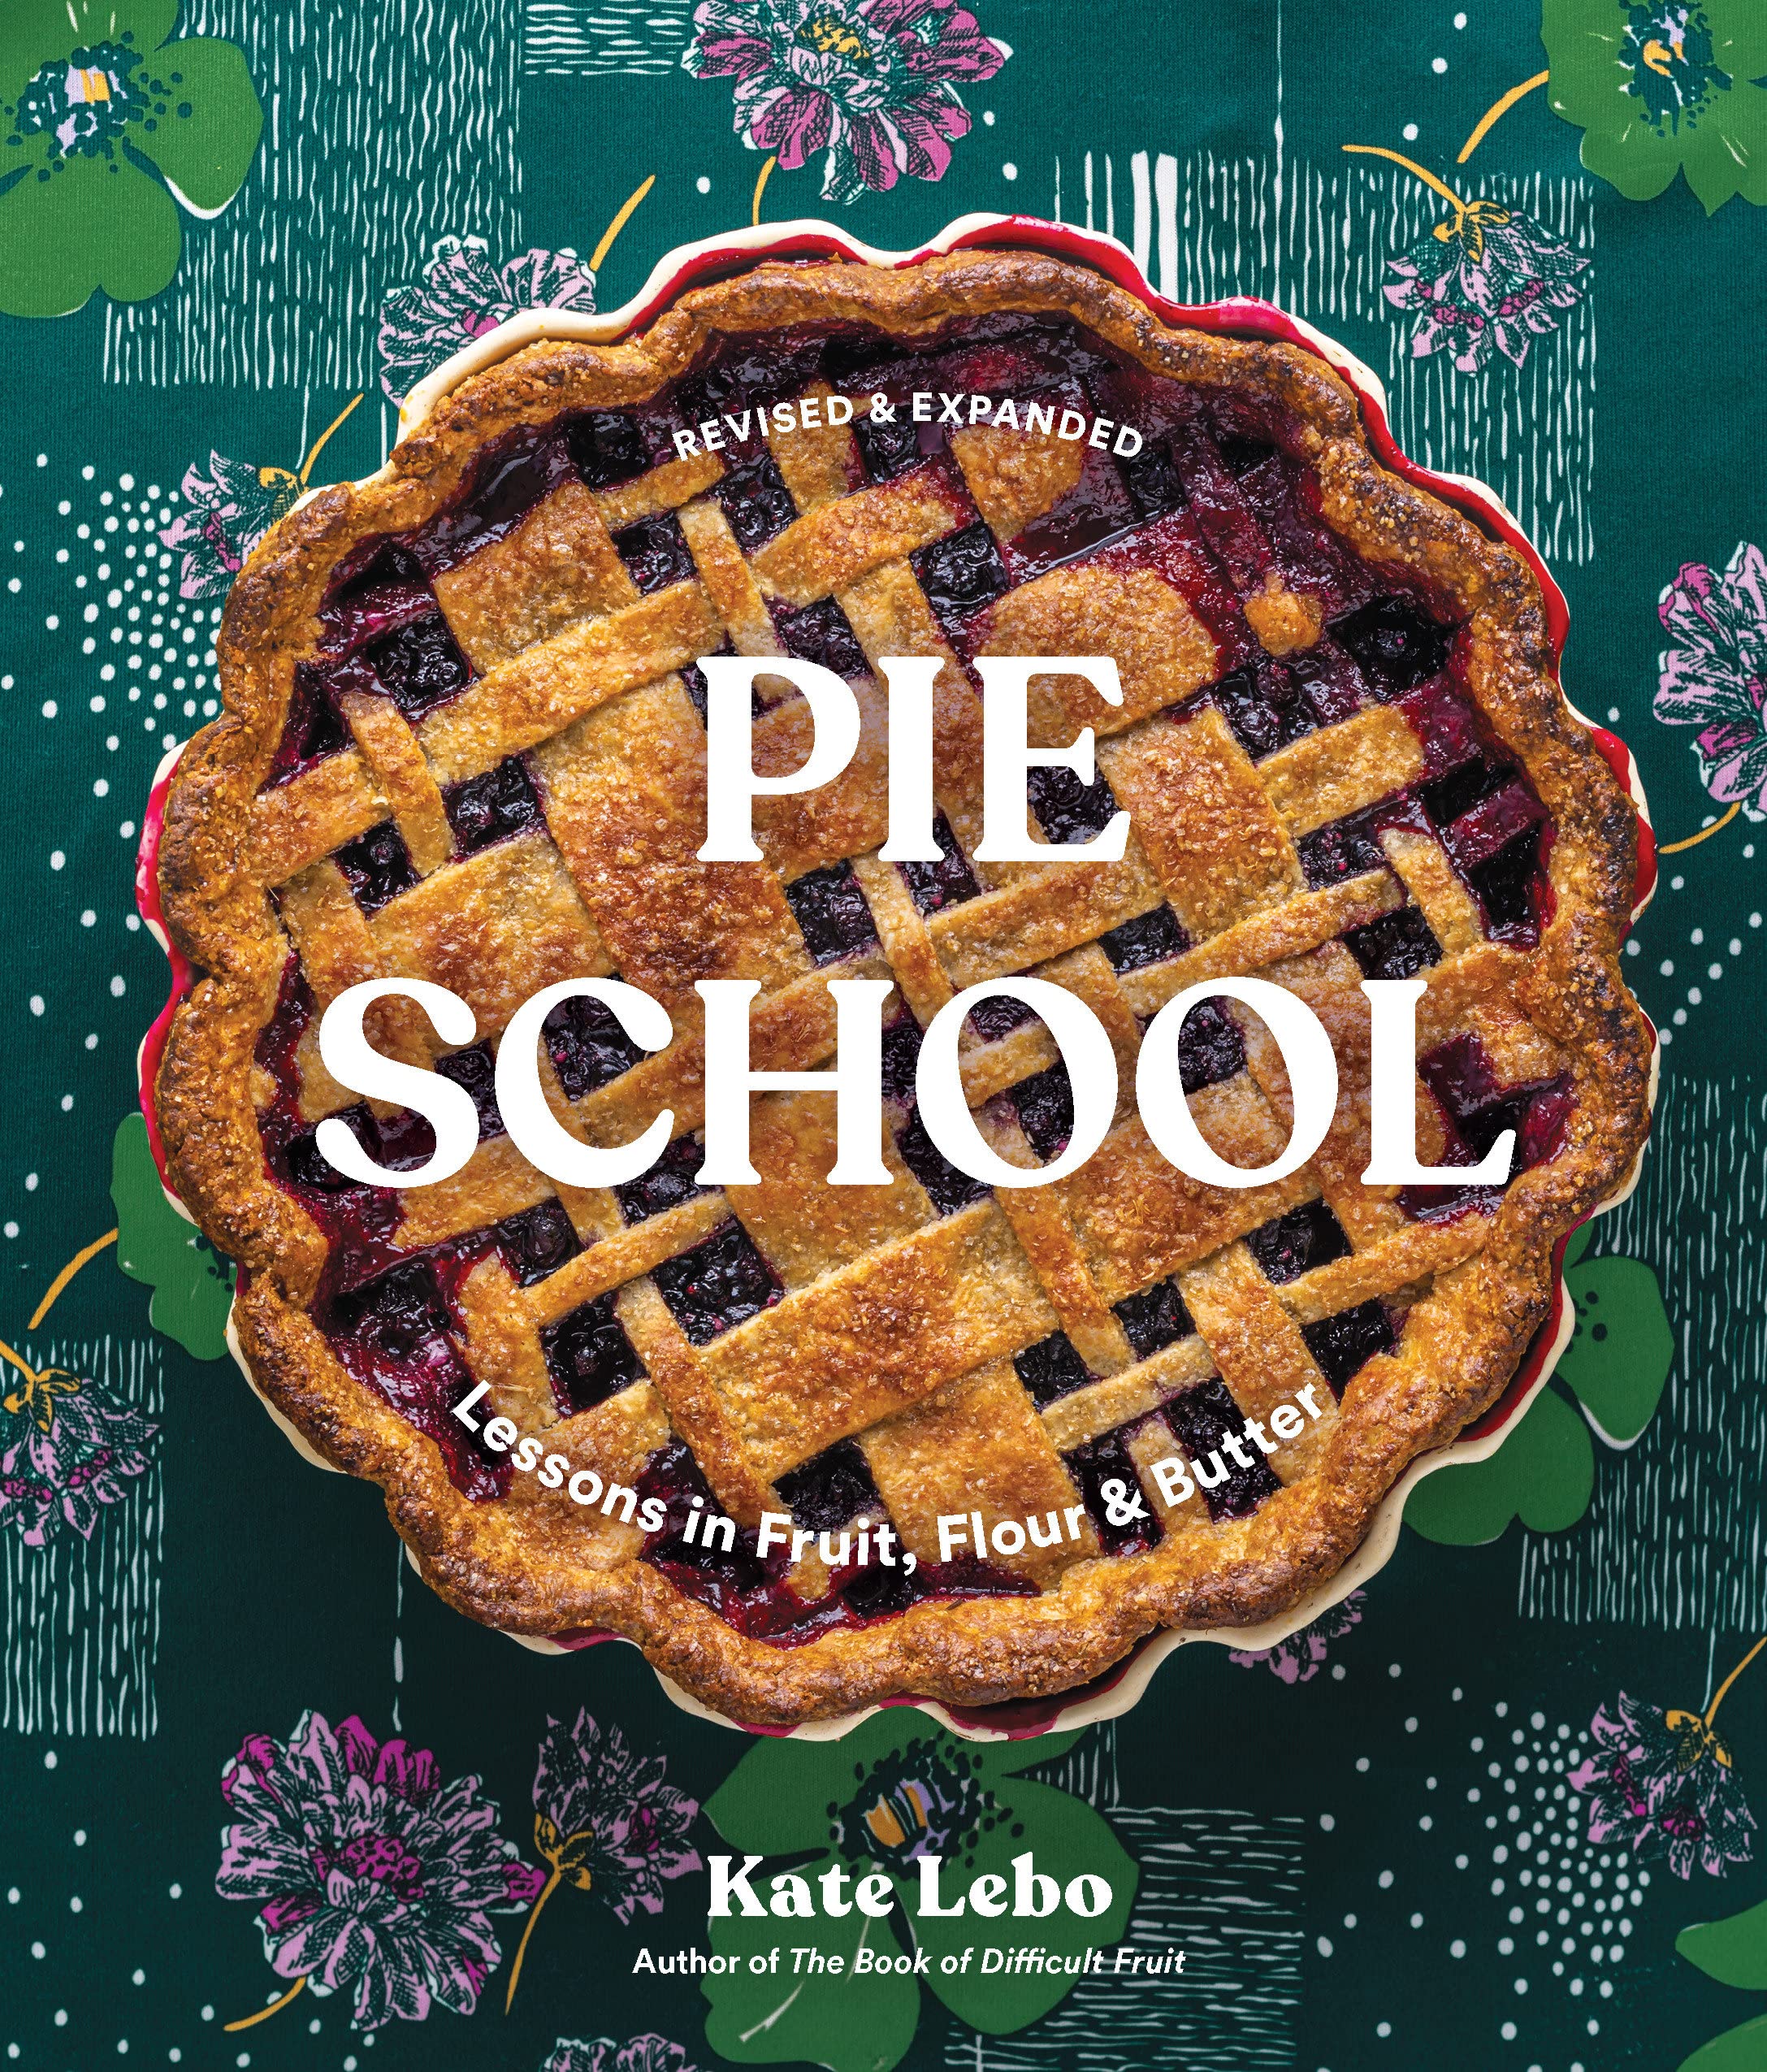 Pie School: Lessons in Fruit, Flour, and Butter (Kate Lebo)